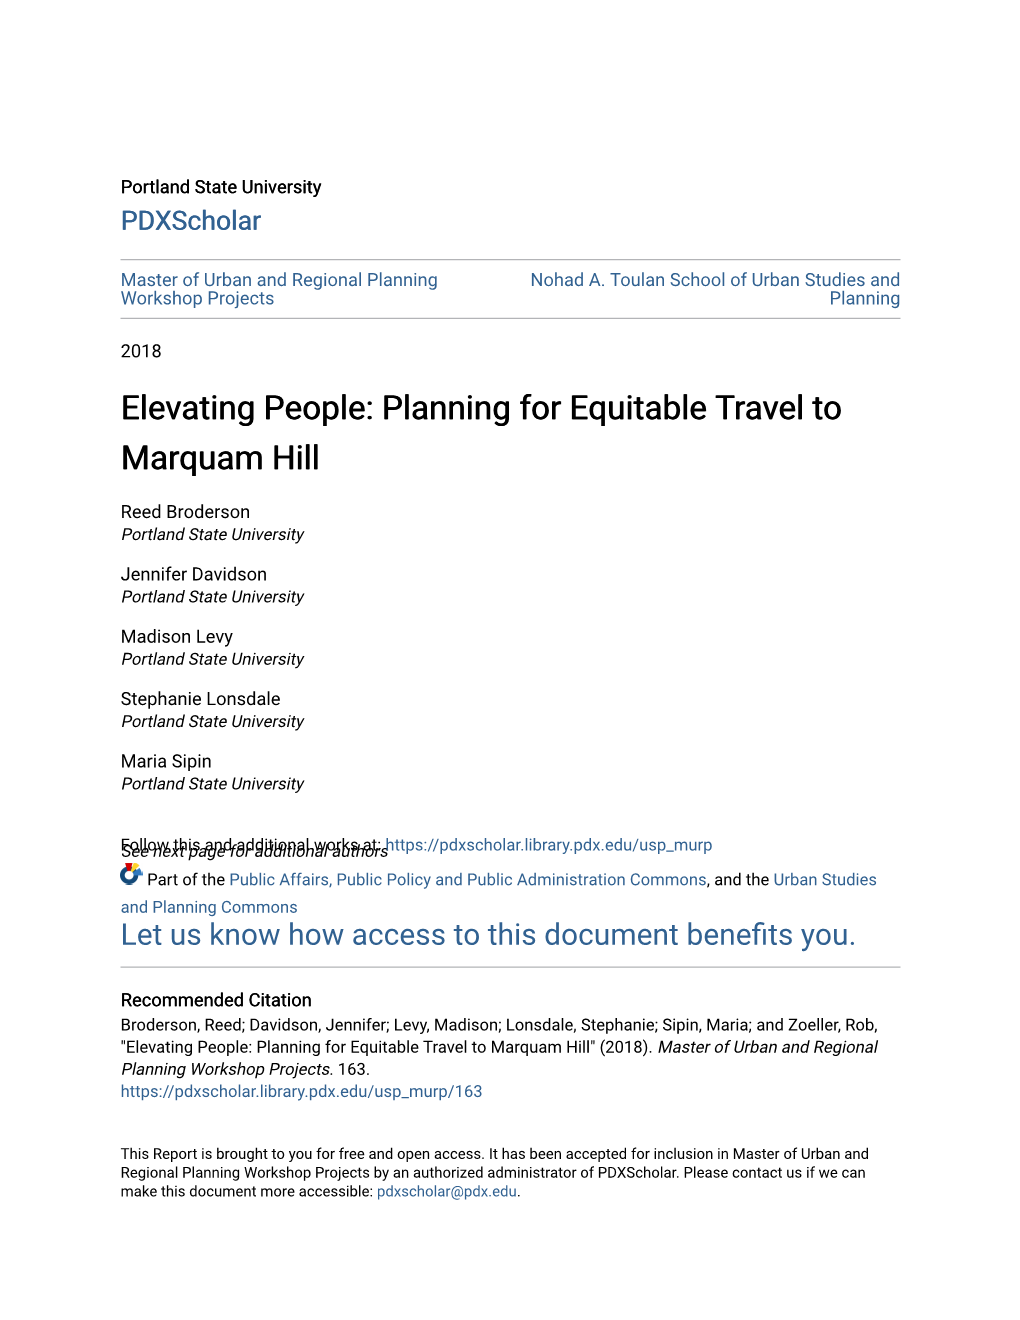 Elevating People: Planning for Equitable Travel to Marquam Hill